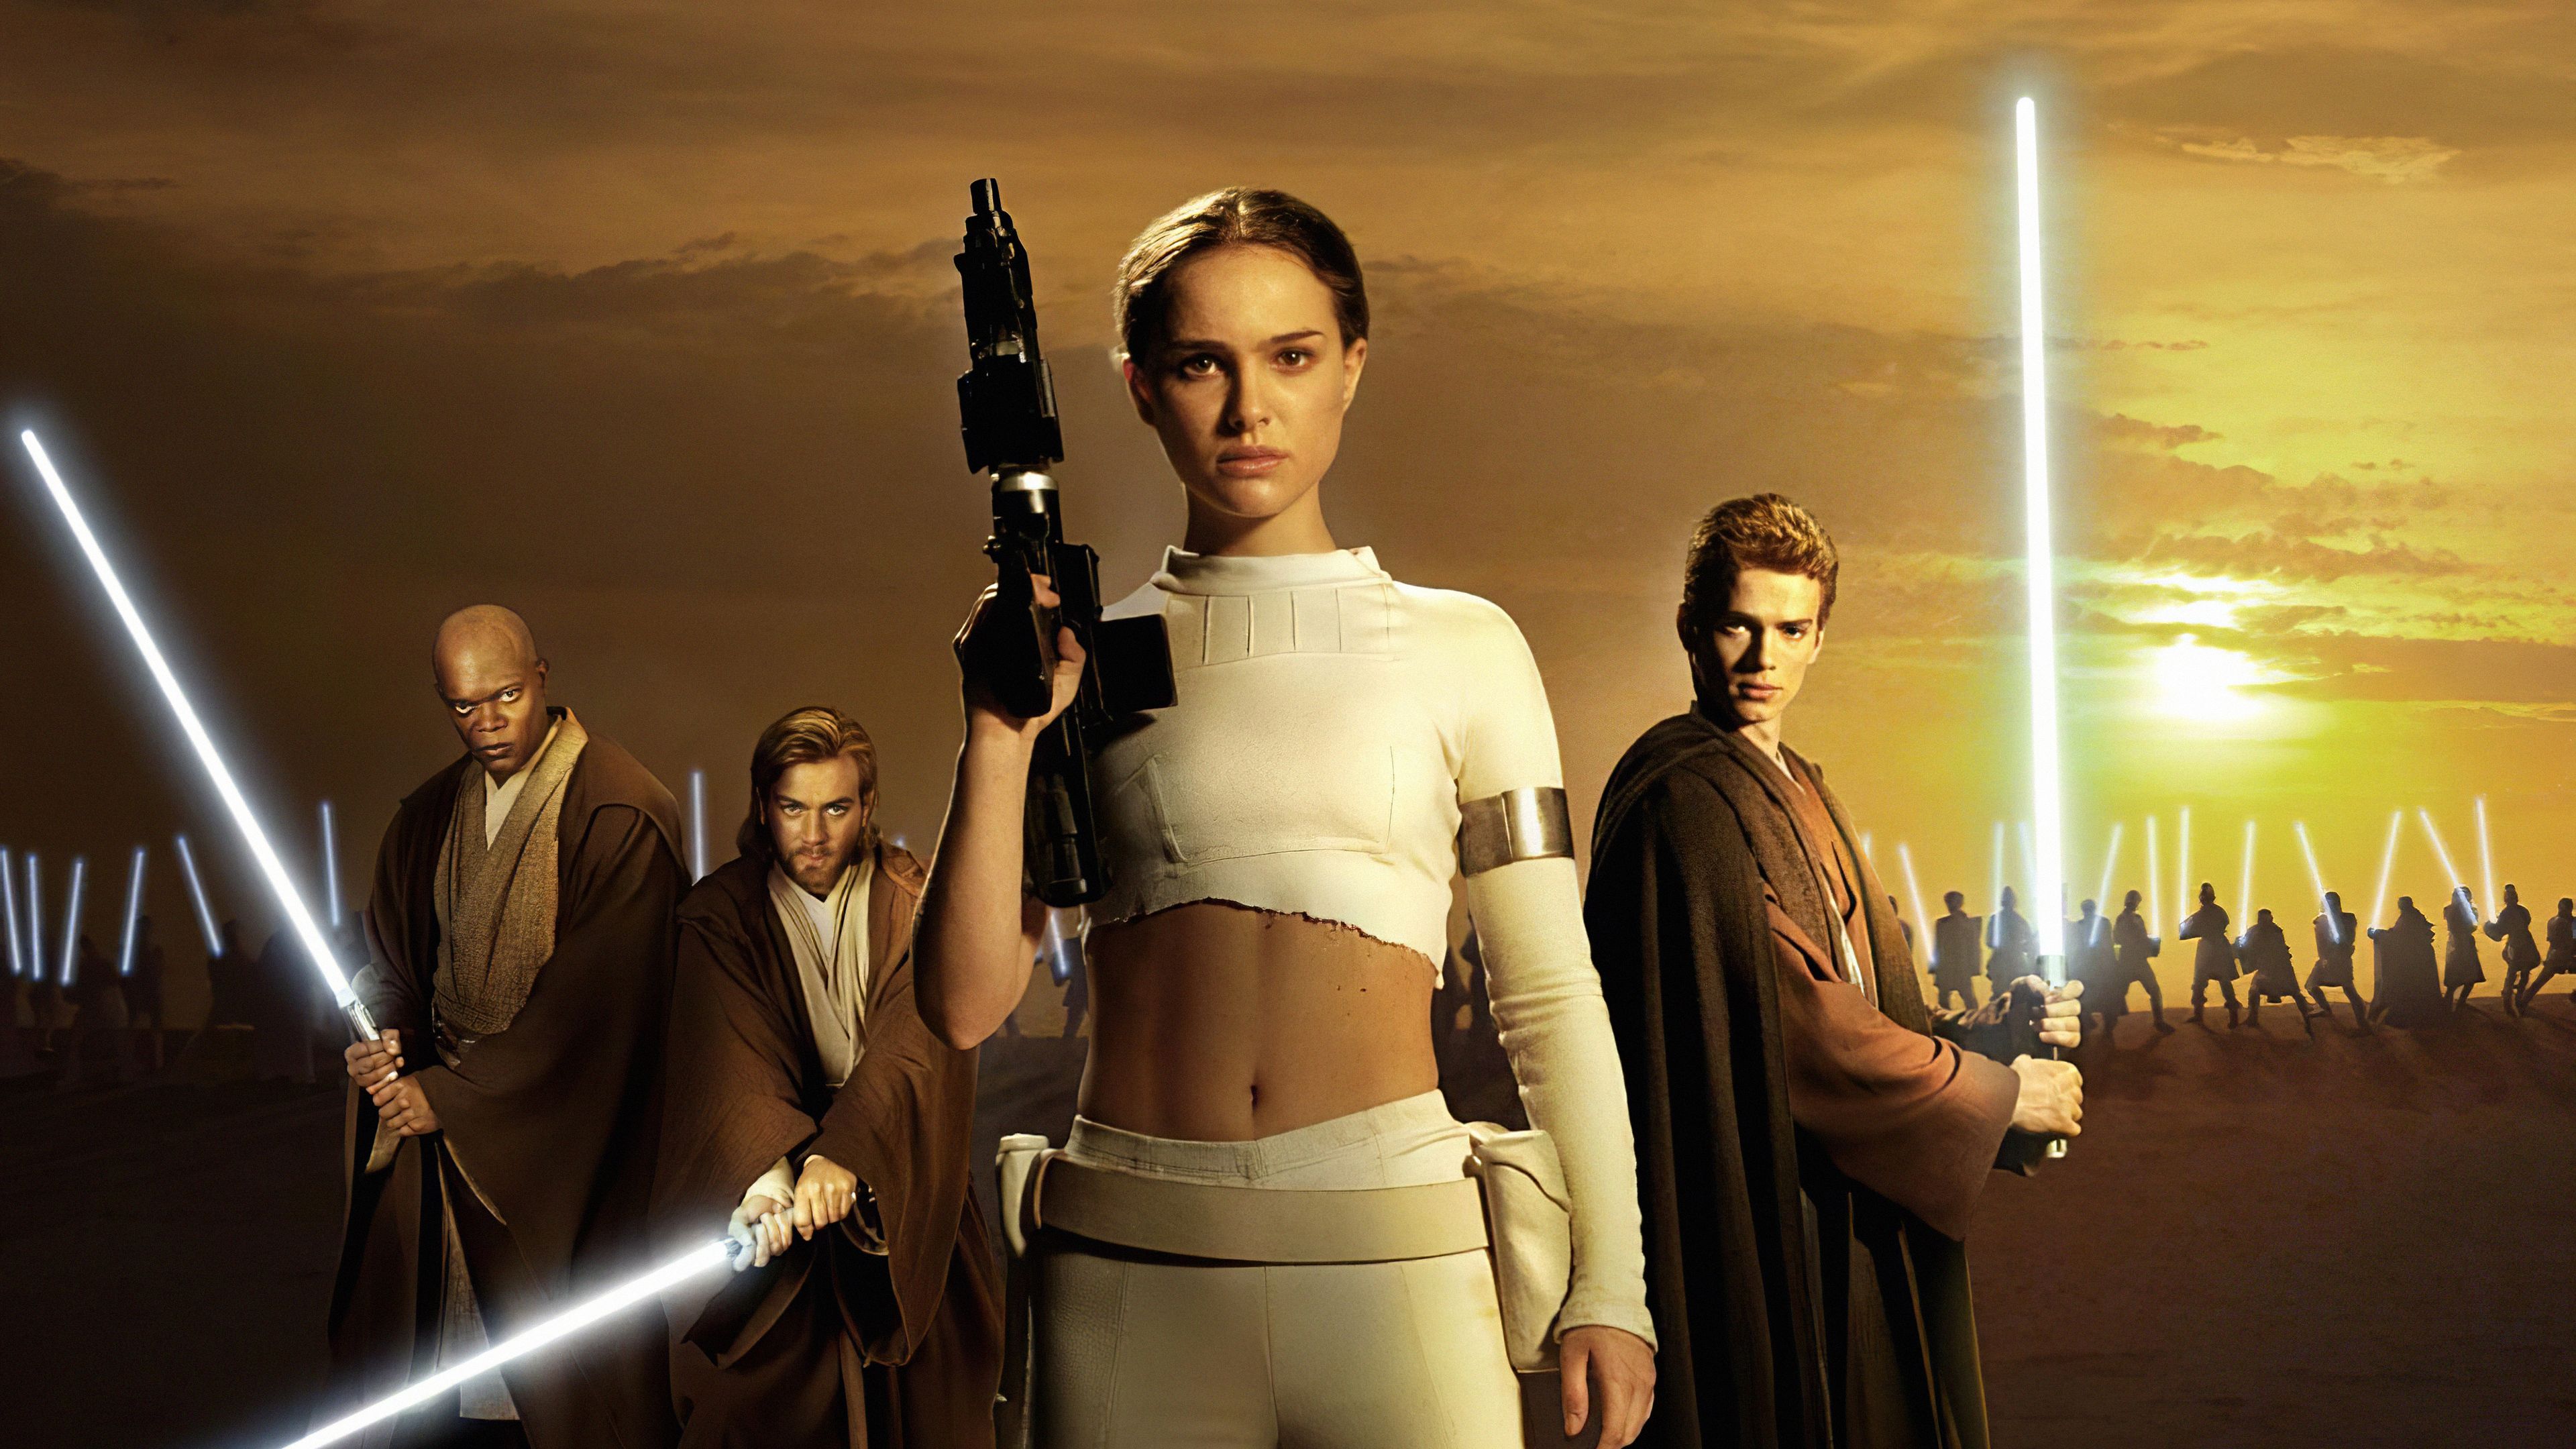 Star Wars Episode II Attack Of The Clones Natalie Portman 4k, HD Movies, 4k Wallpaper, Image, Background, Photo and Picture